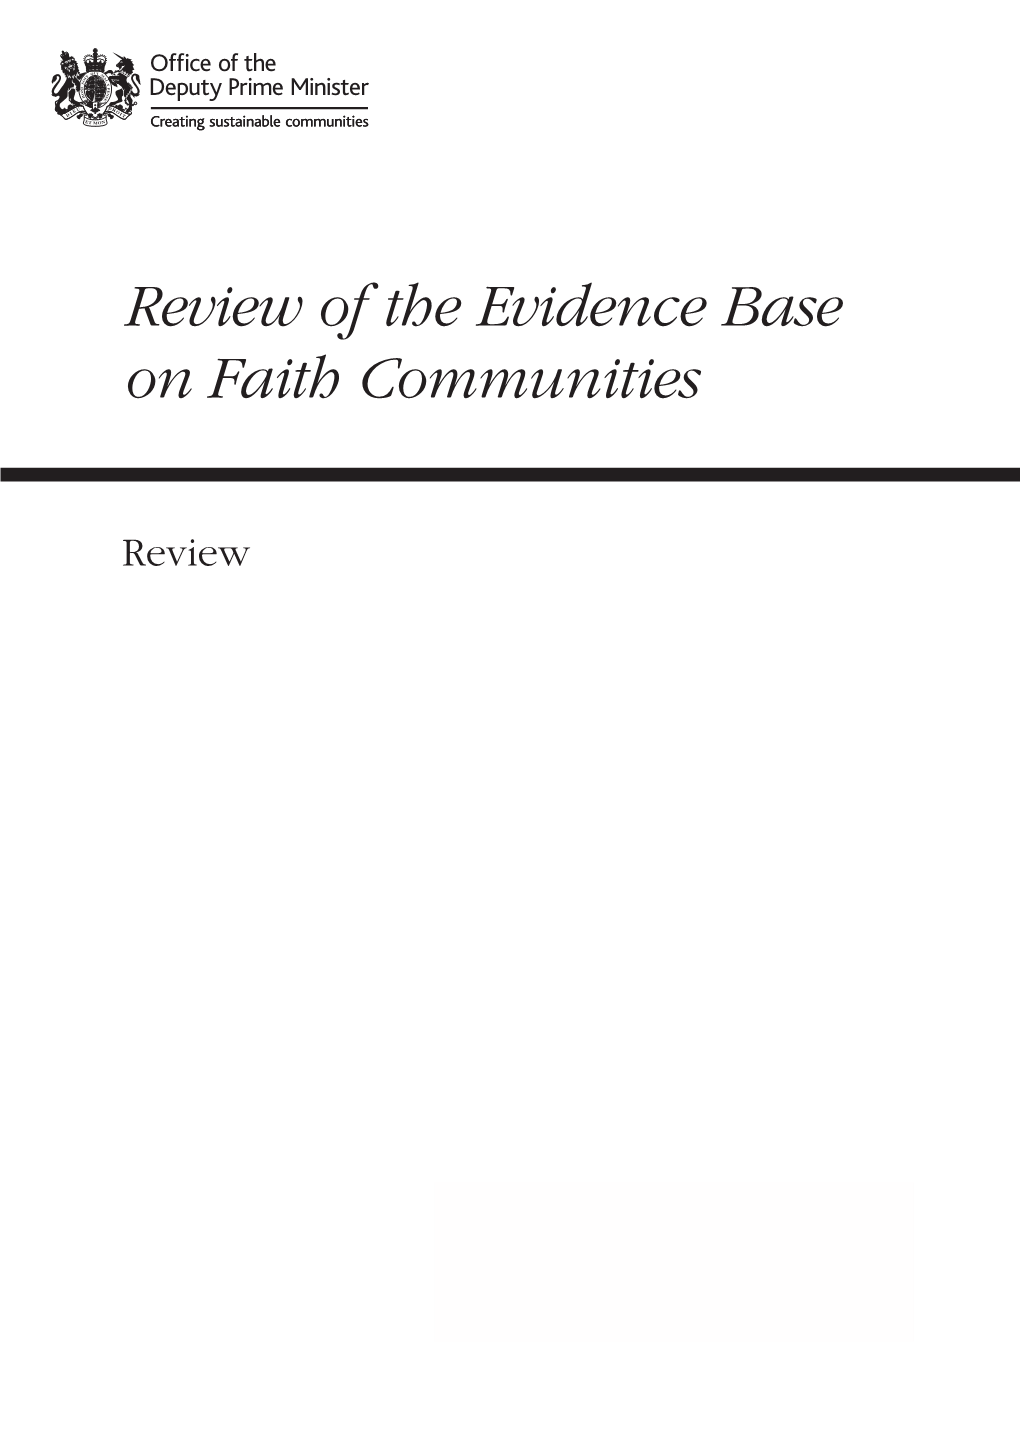 Review of the Evidence Base on Faith Communities